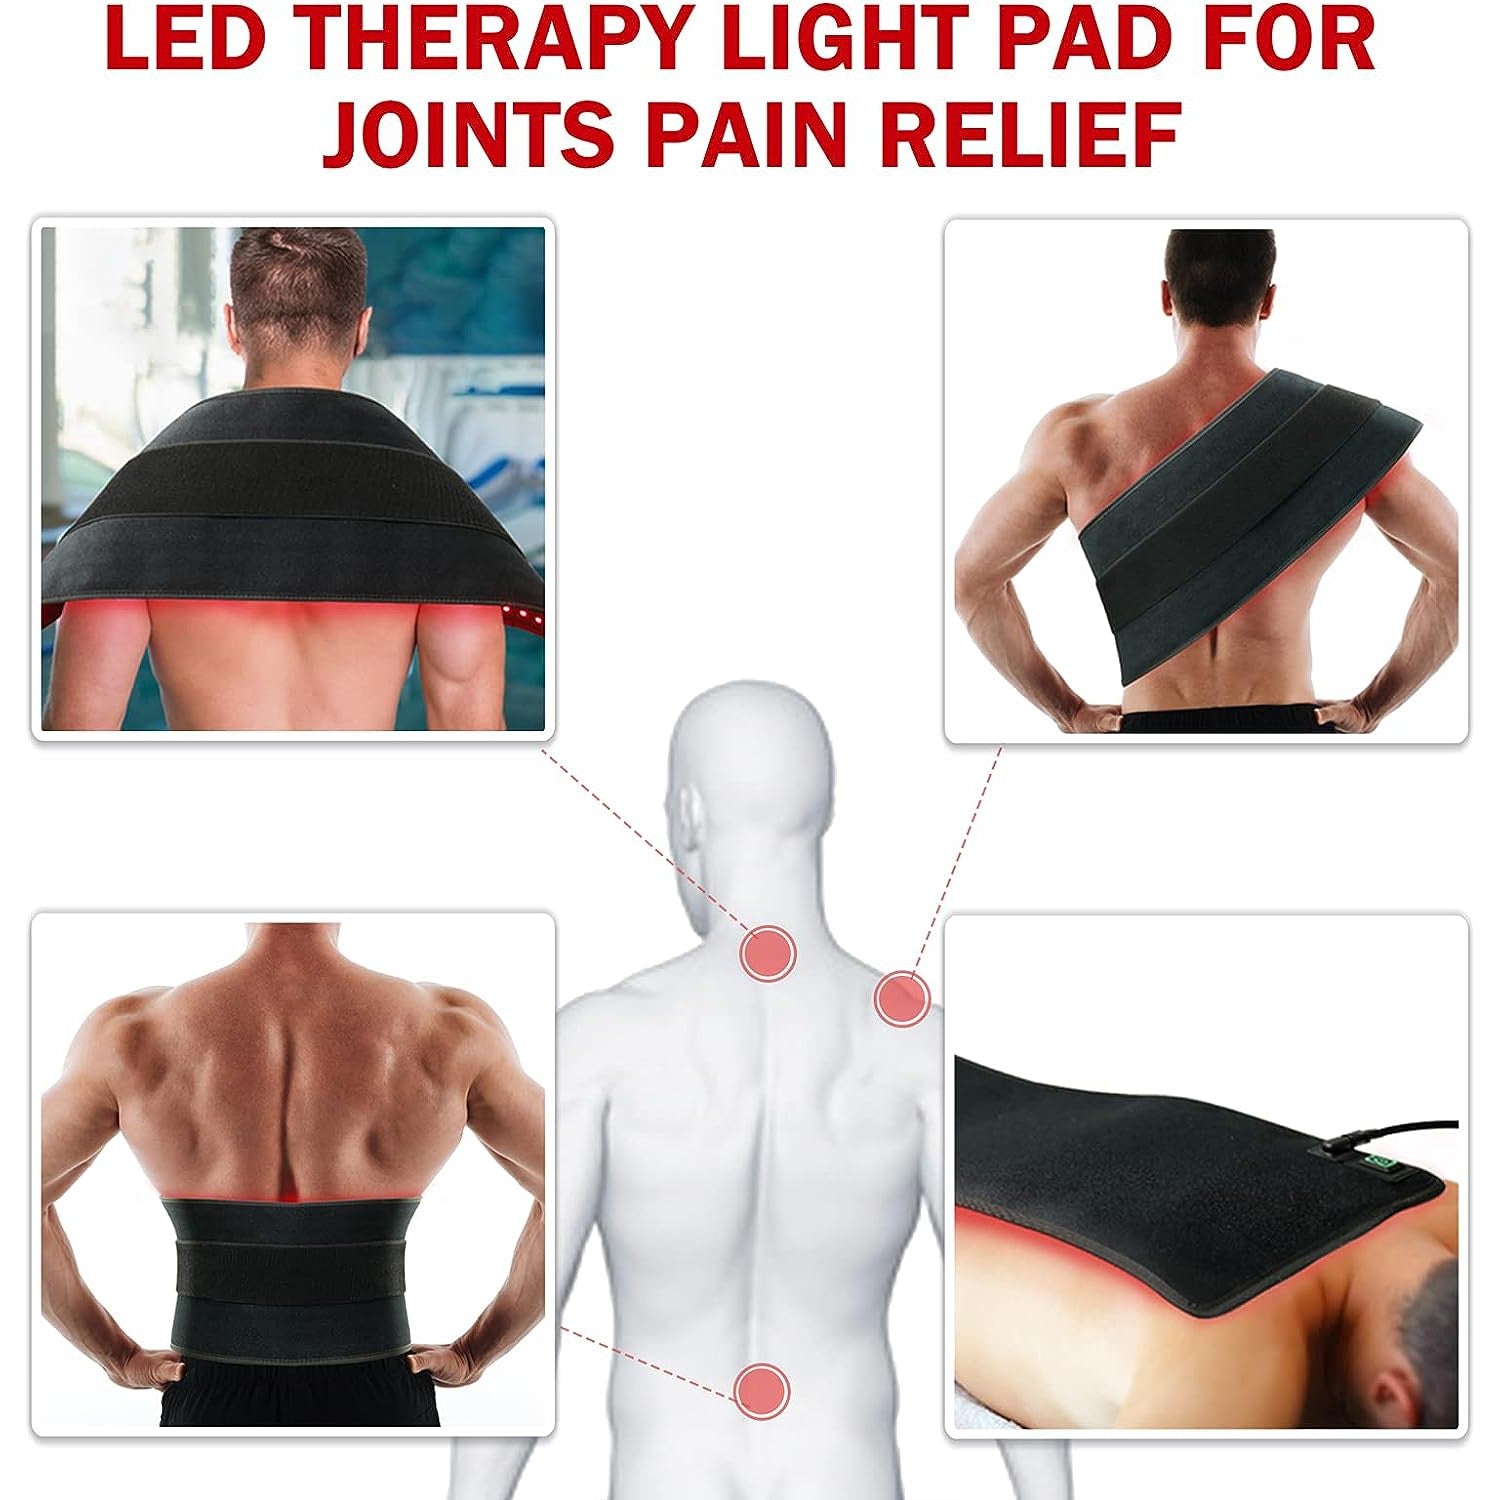 UTK Red Light Therapy Devices Wearable Wrap Red Light and Near Infrared LED Light Belt - Purely Relaxation